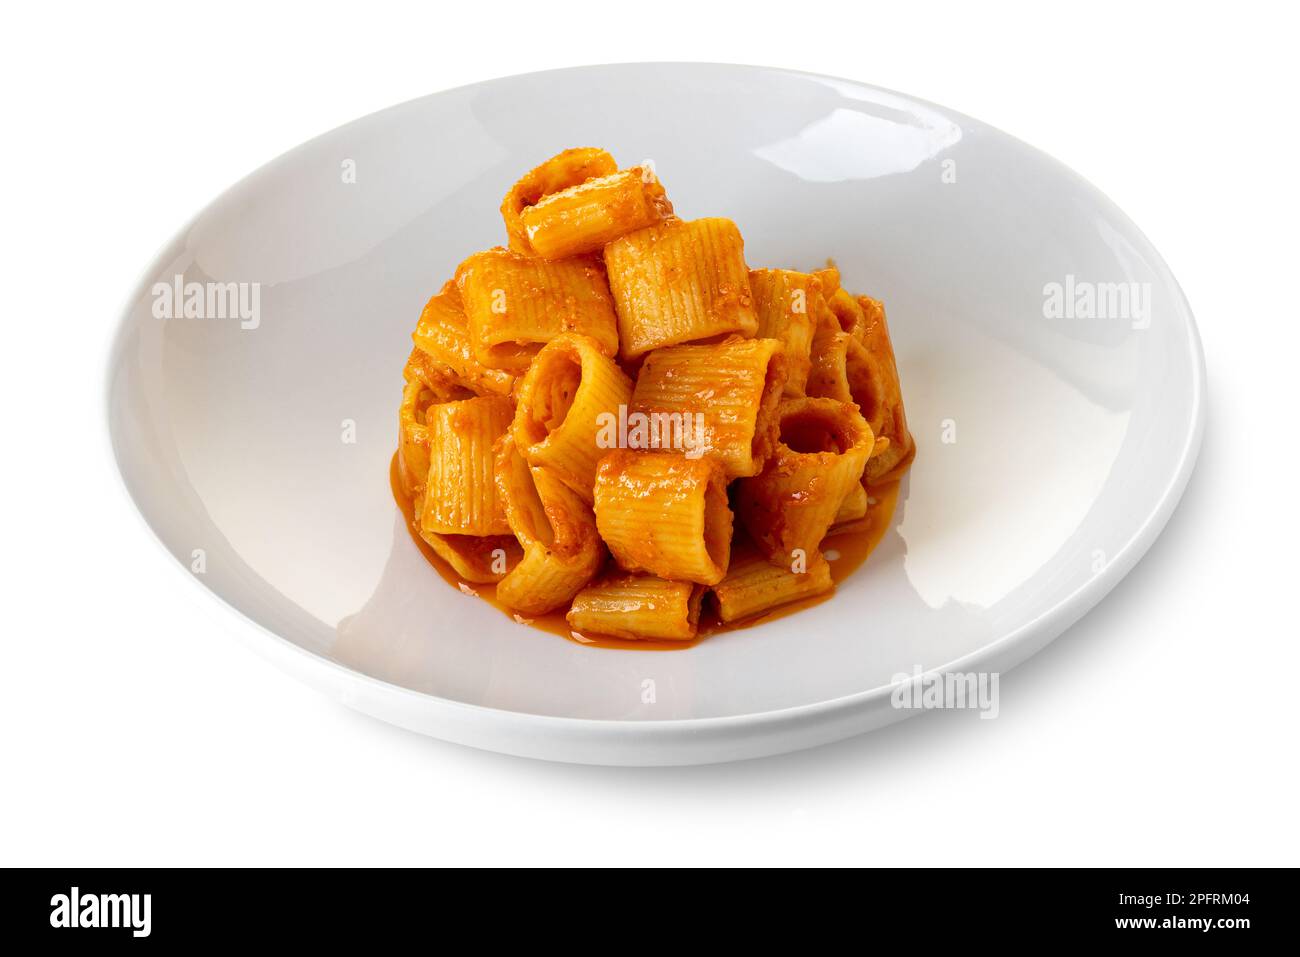 Mezze maniche macaroni pasta cooked with red tomato sauce in white plate, isolated on white, clipping path included Stock Photo